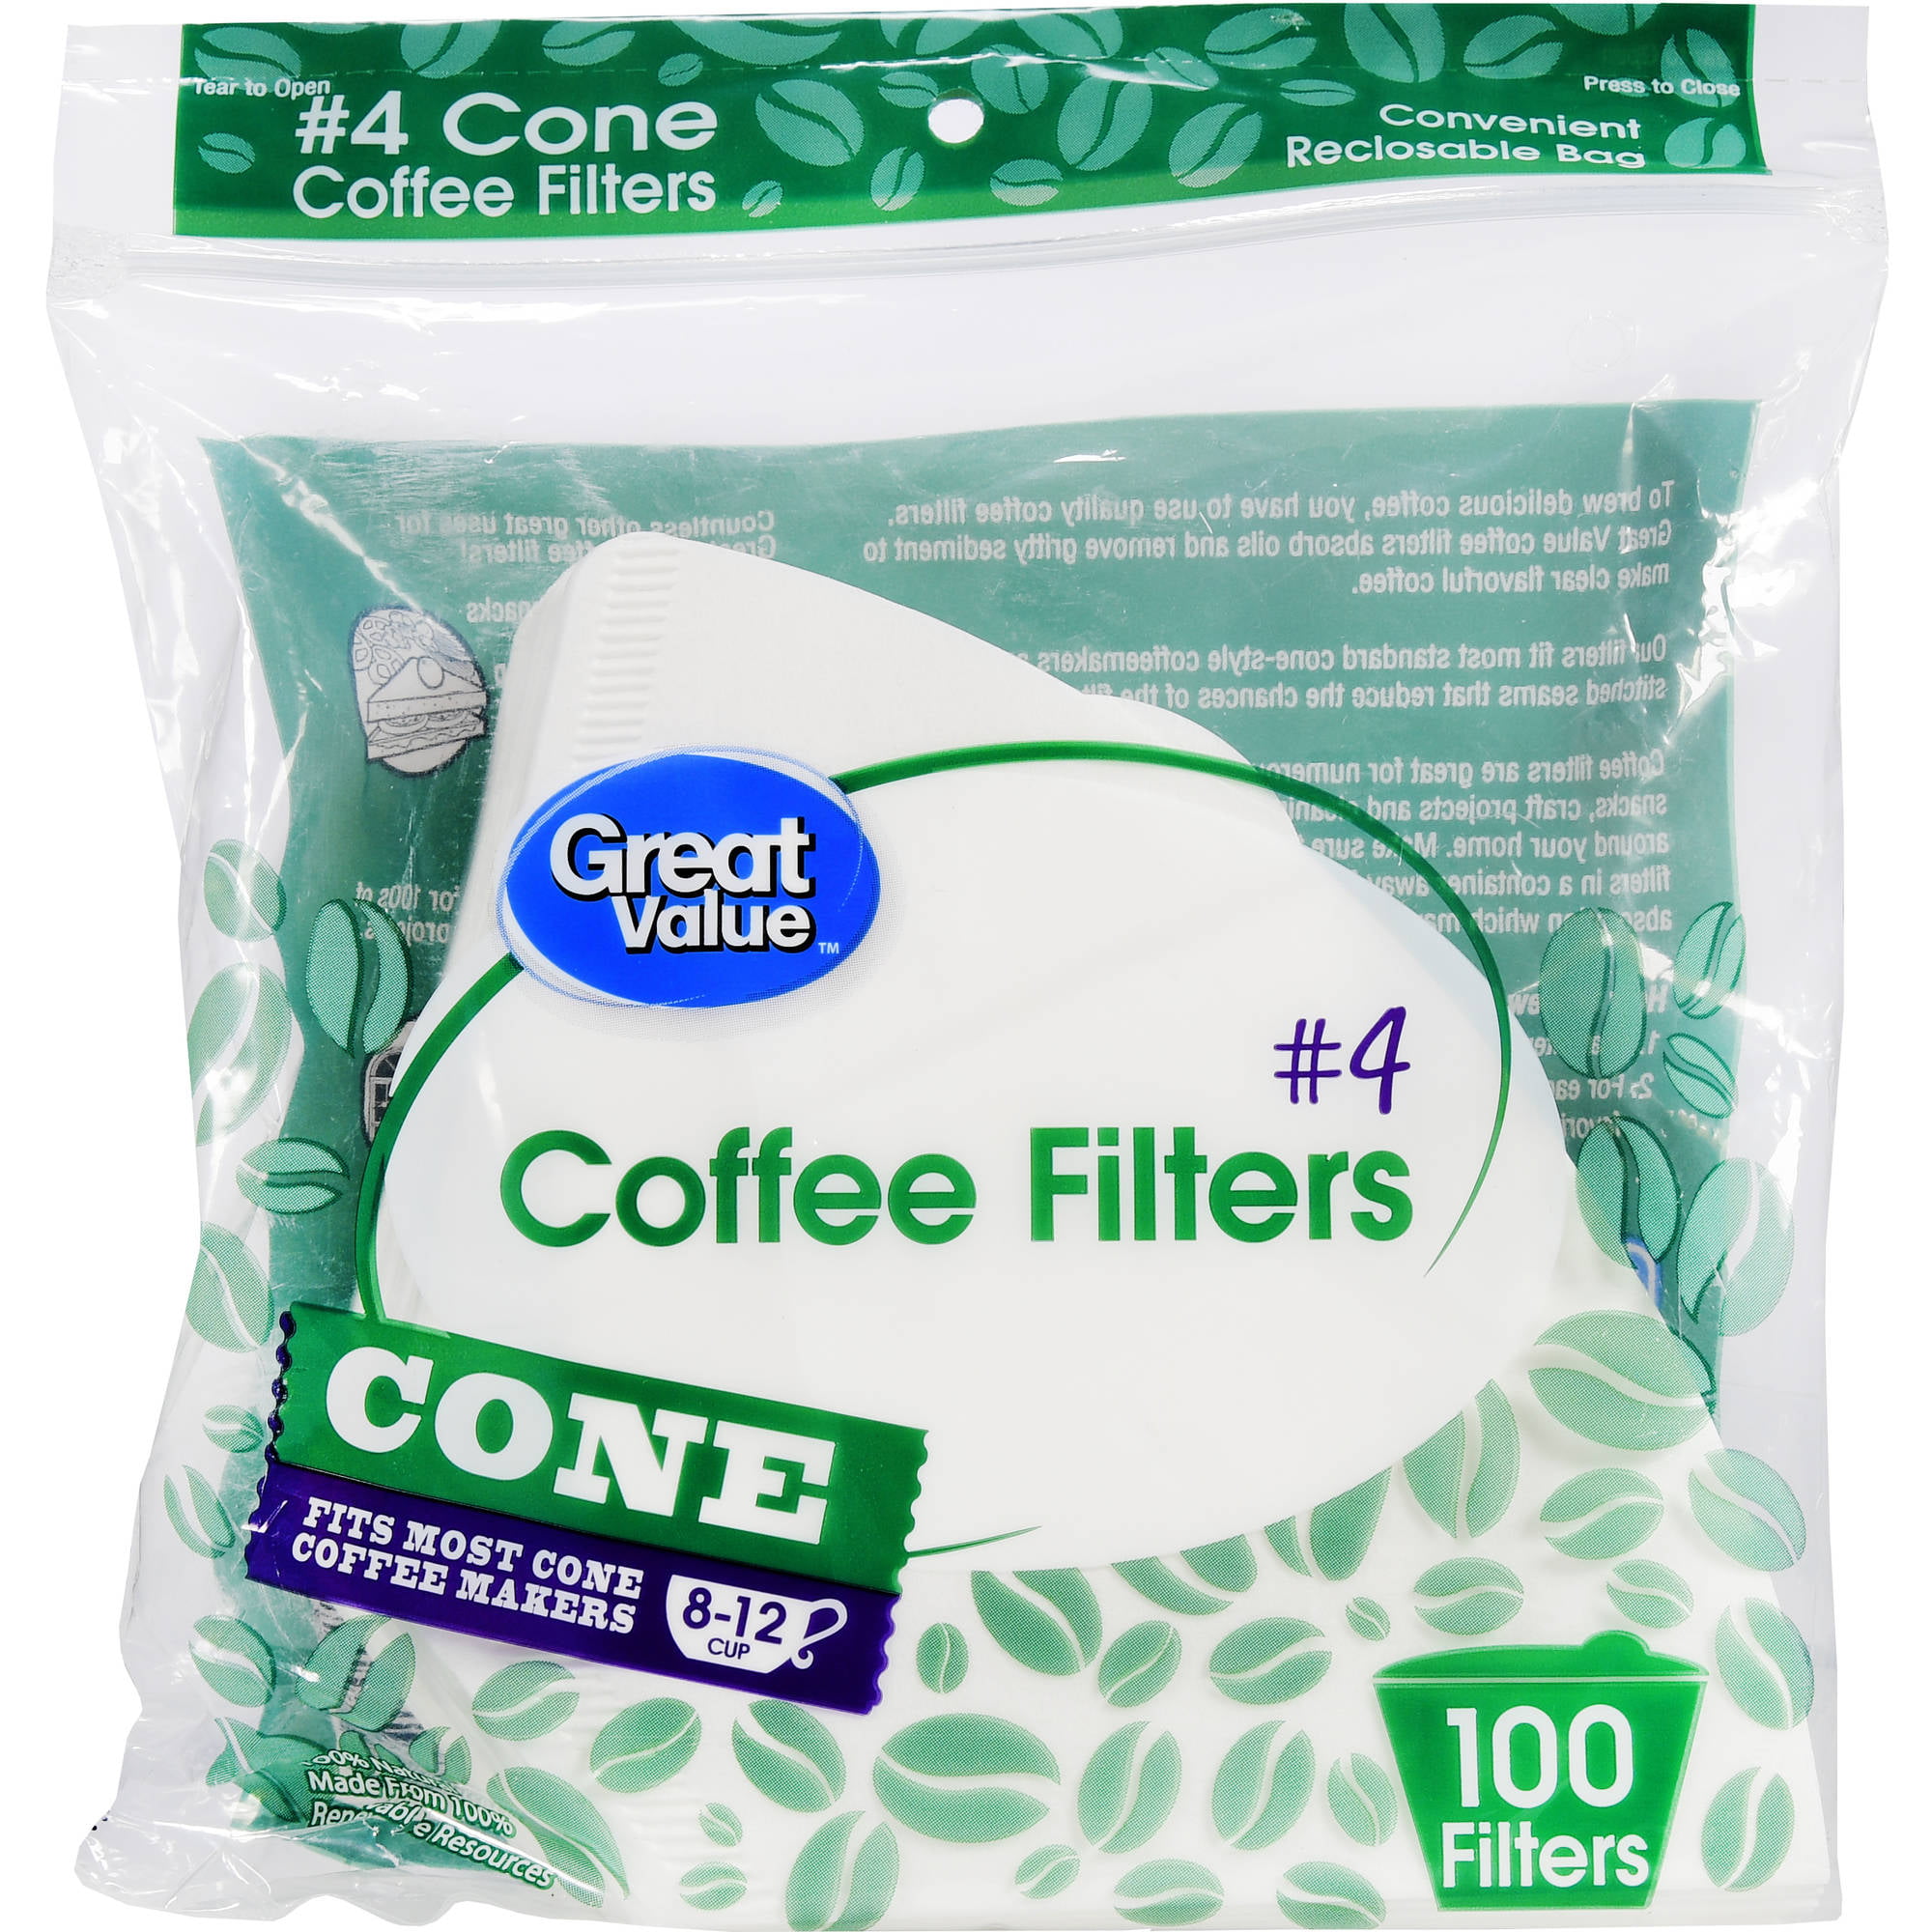 Details about   Great Value #4 Cone Coffee Filters 100 count 3 Pack 